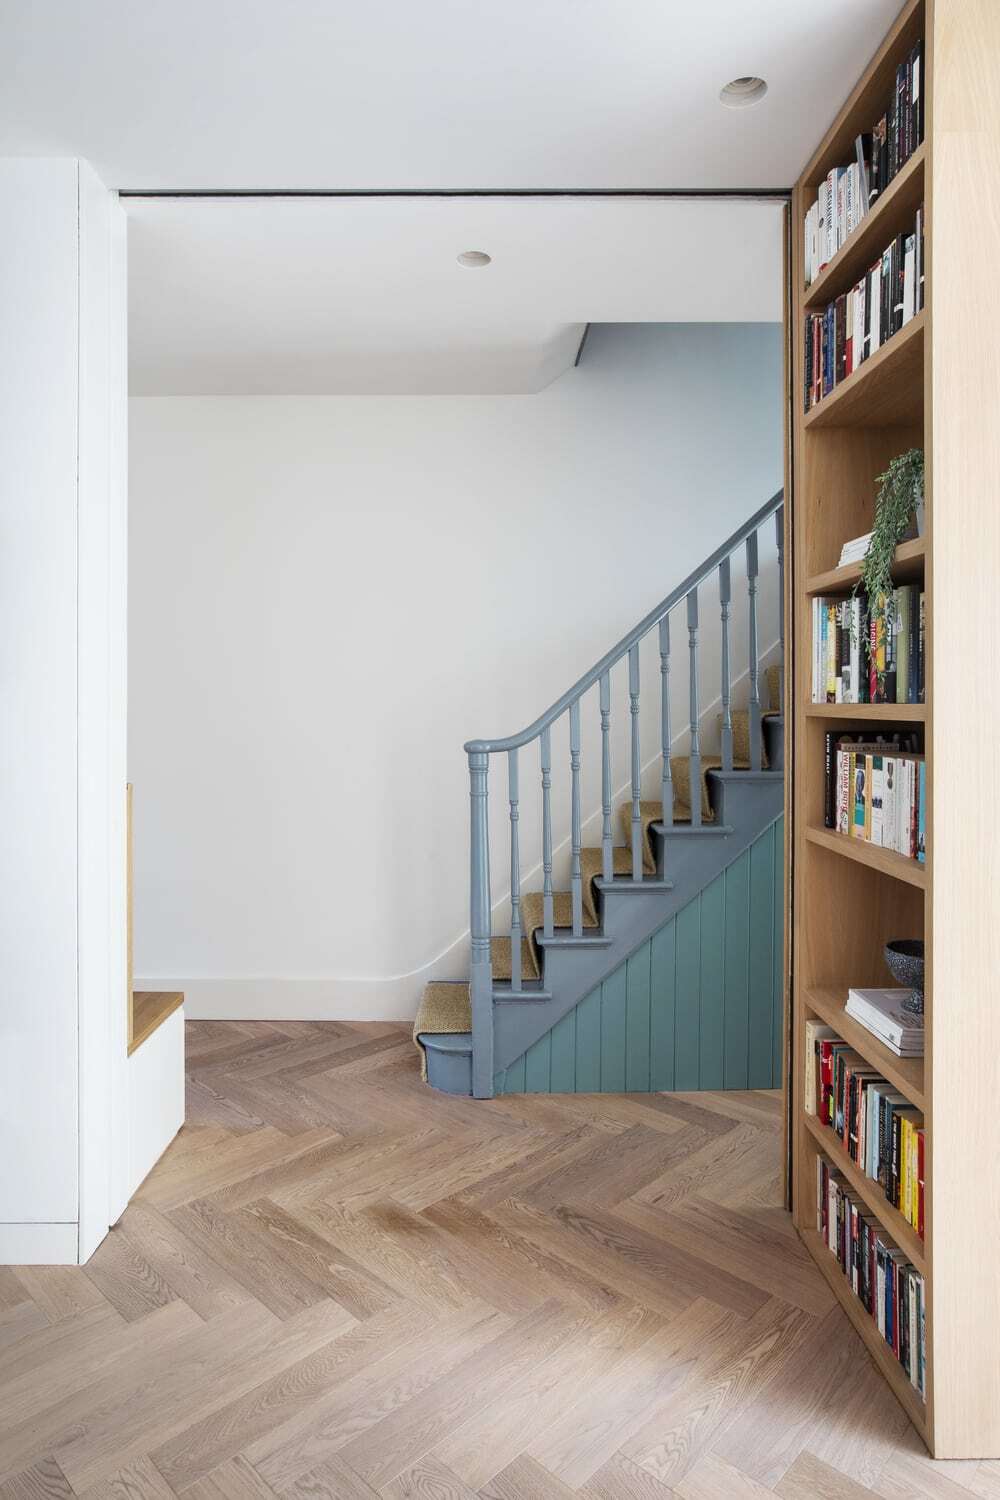 Effra House - Reconfiguration of a Victorian Terraced House by Studioort